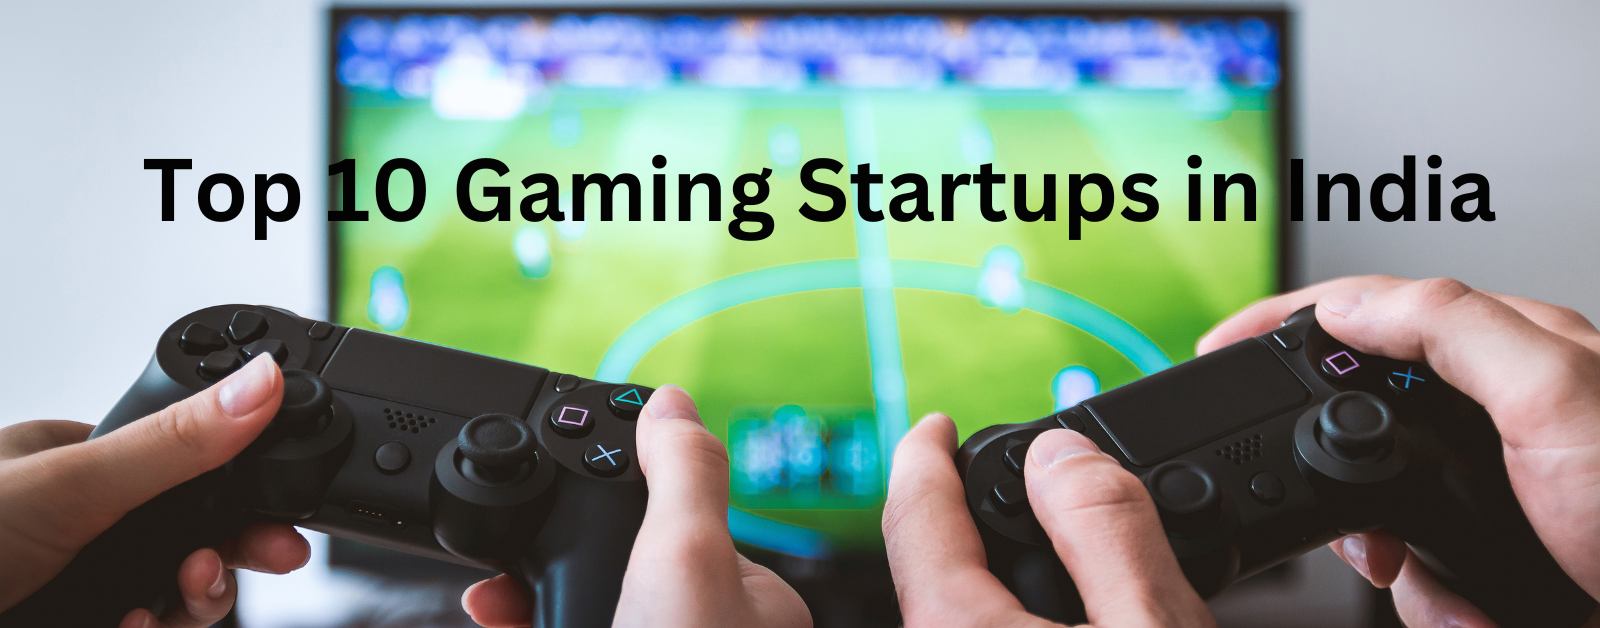 Top 10 Gaming Startups in India: Driving Innovation and Growth in the Global Gaming Market